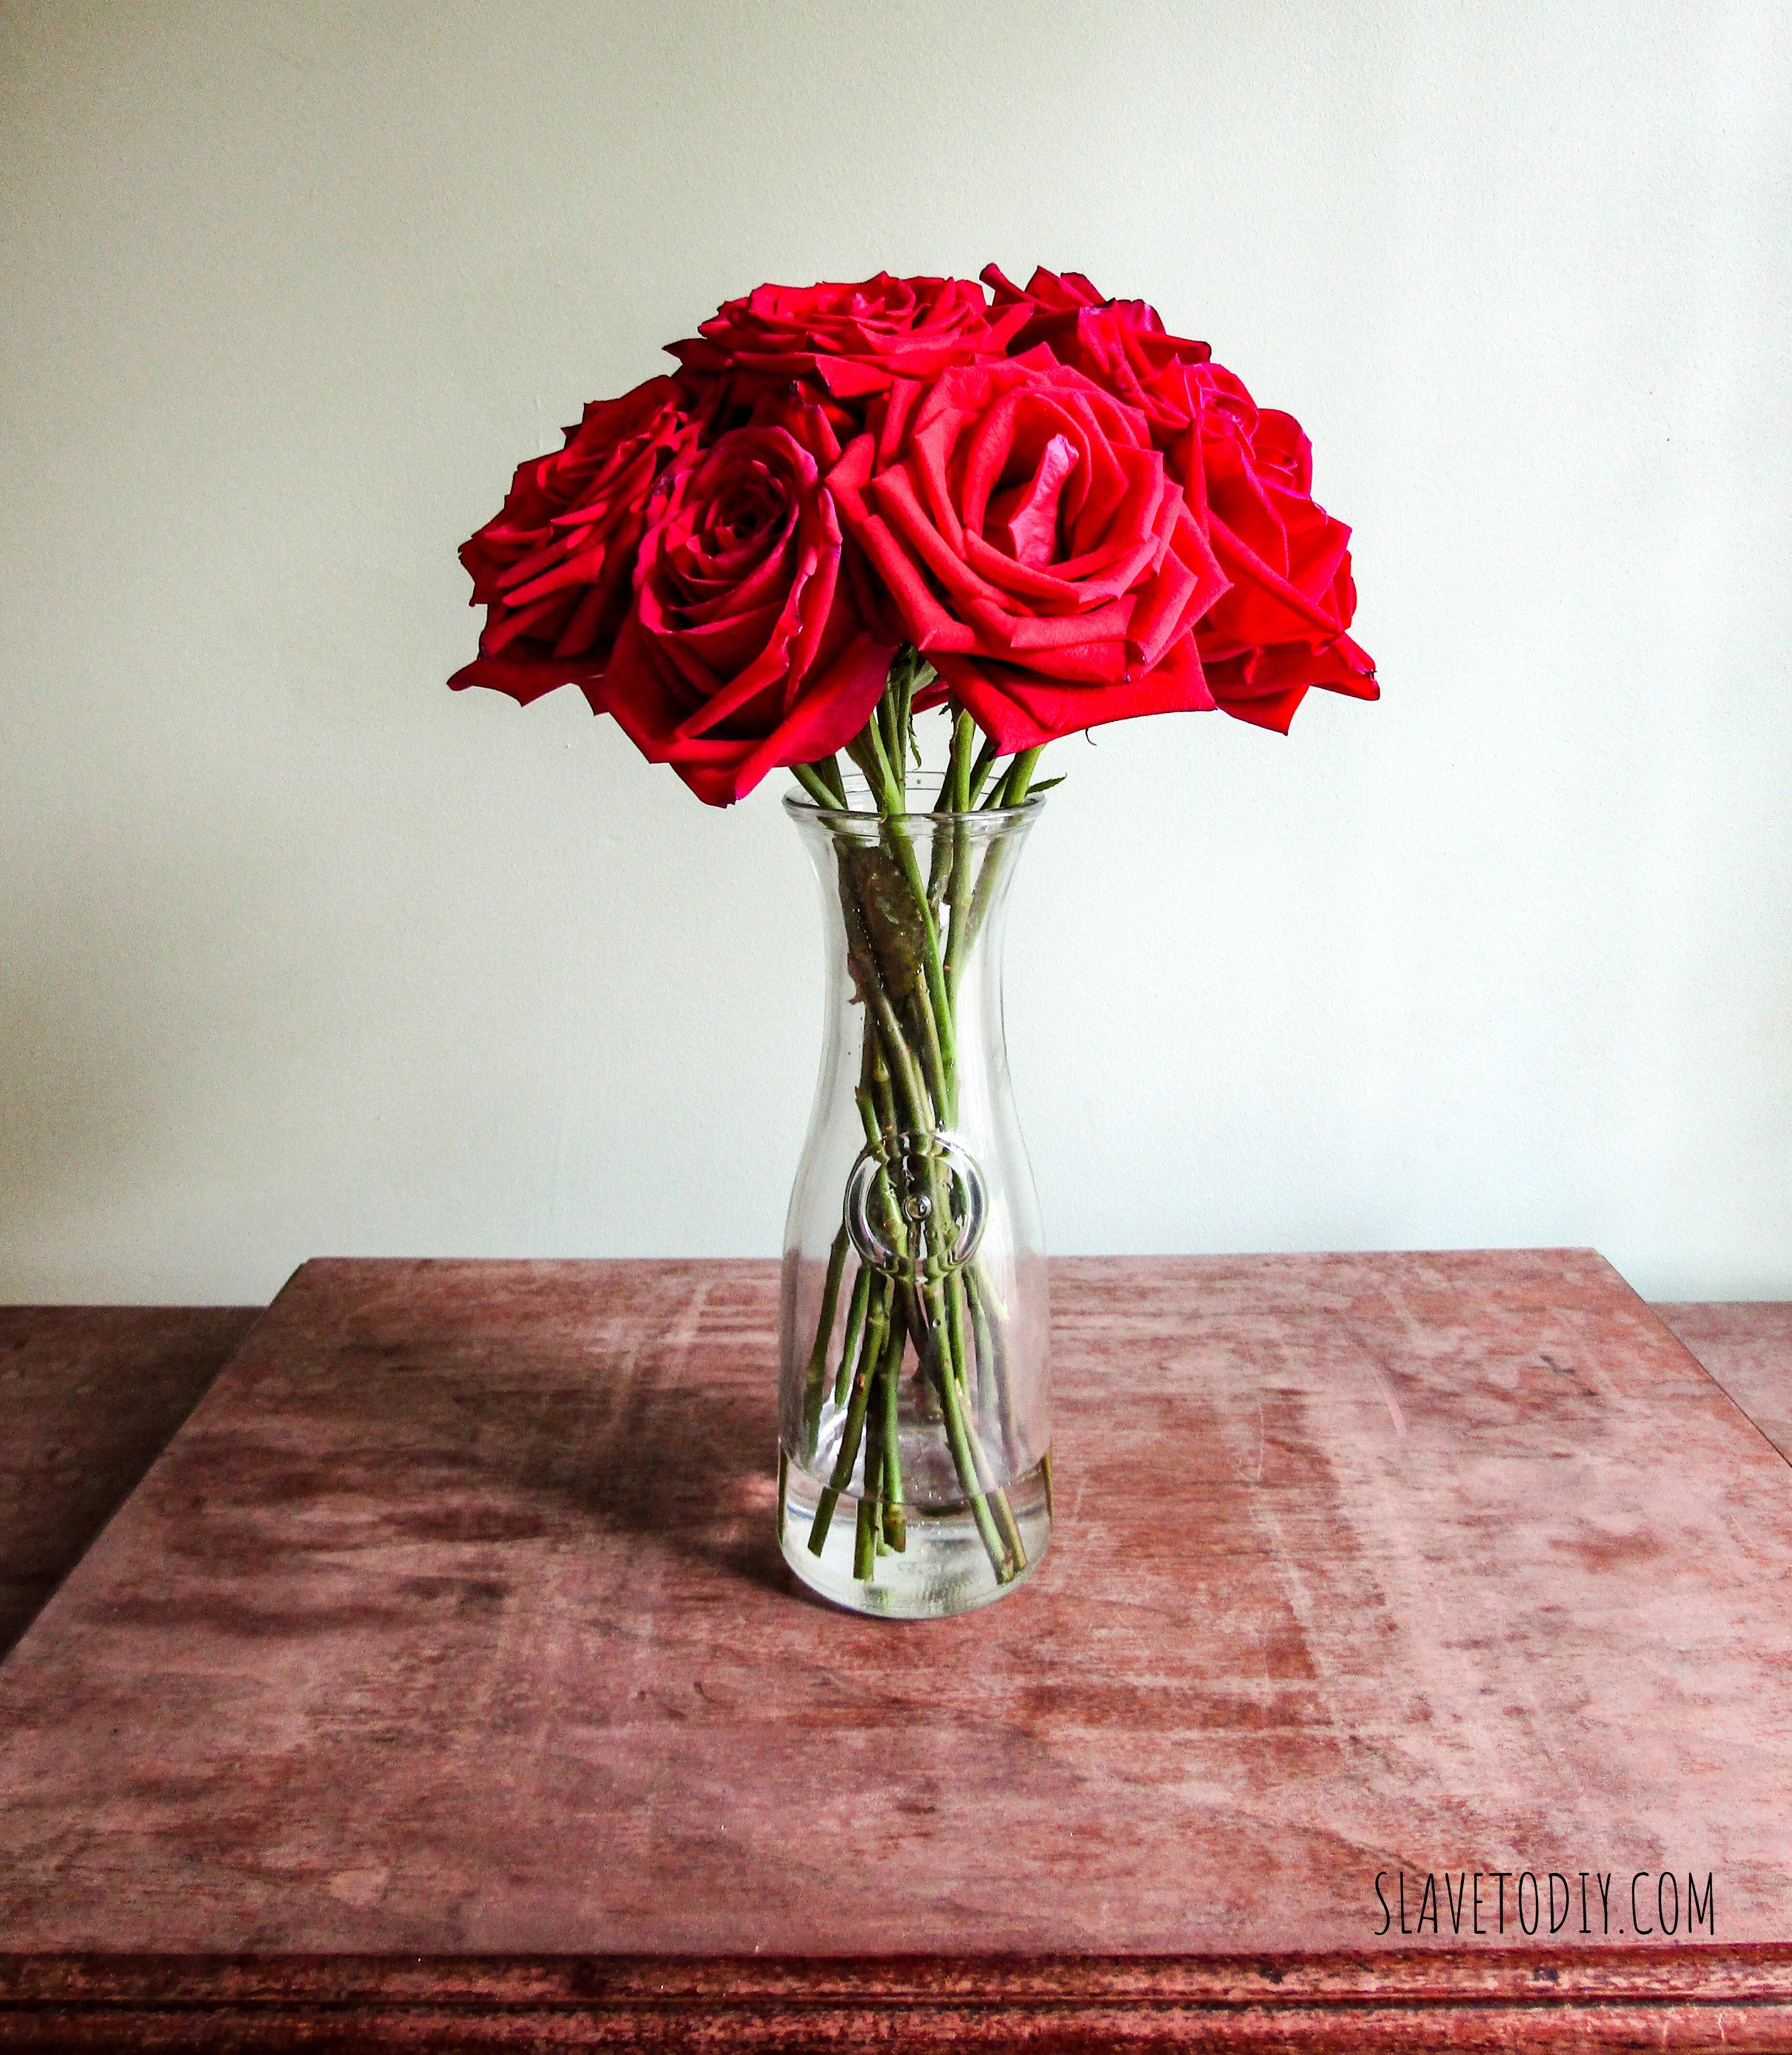 How to Preserve Roses: Keep Roses Fresh Forever